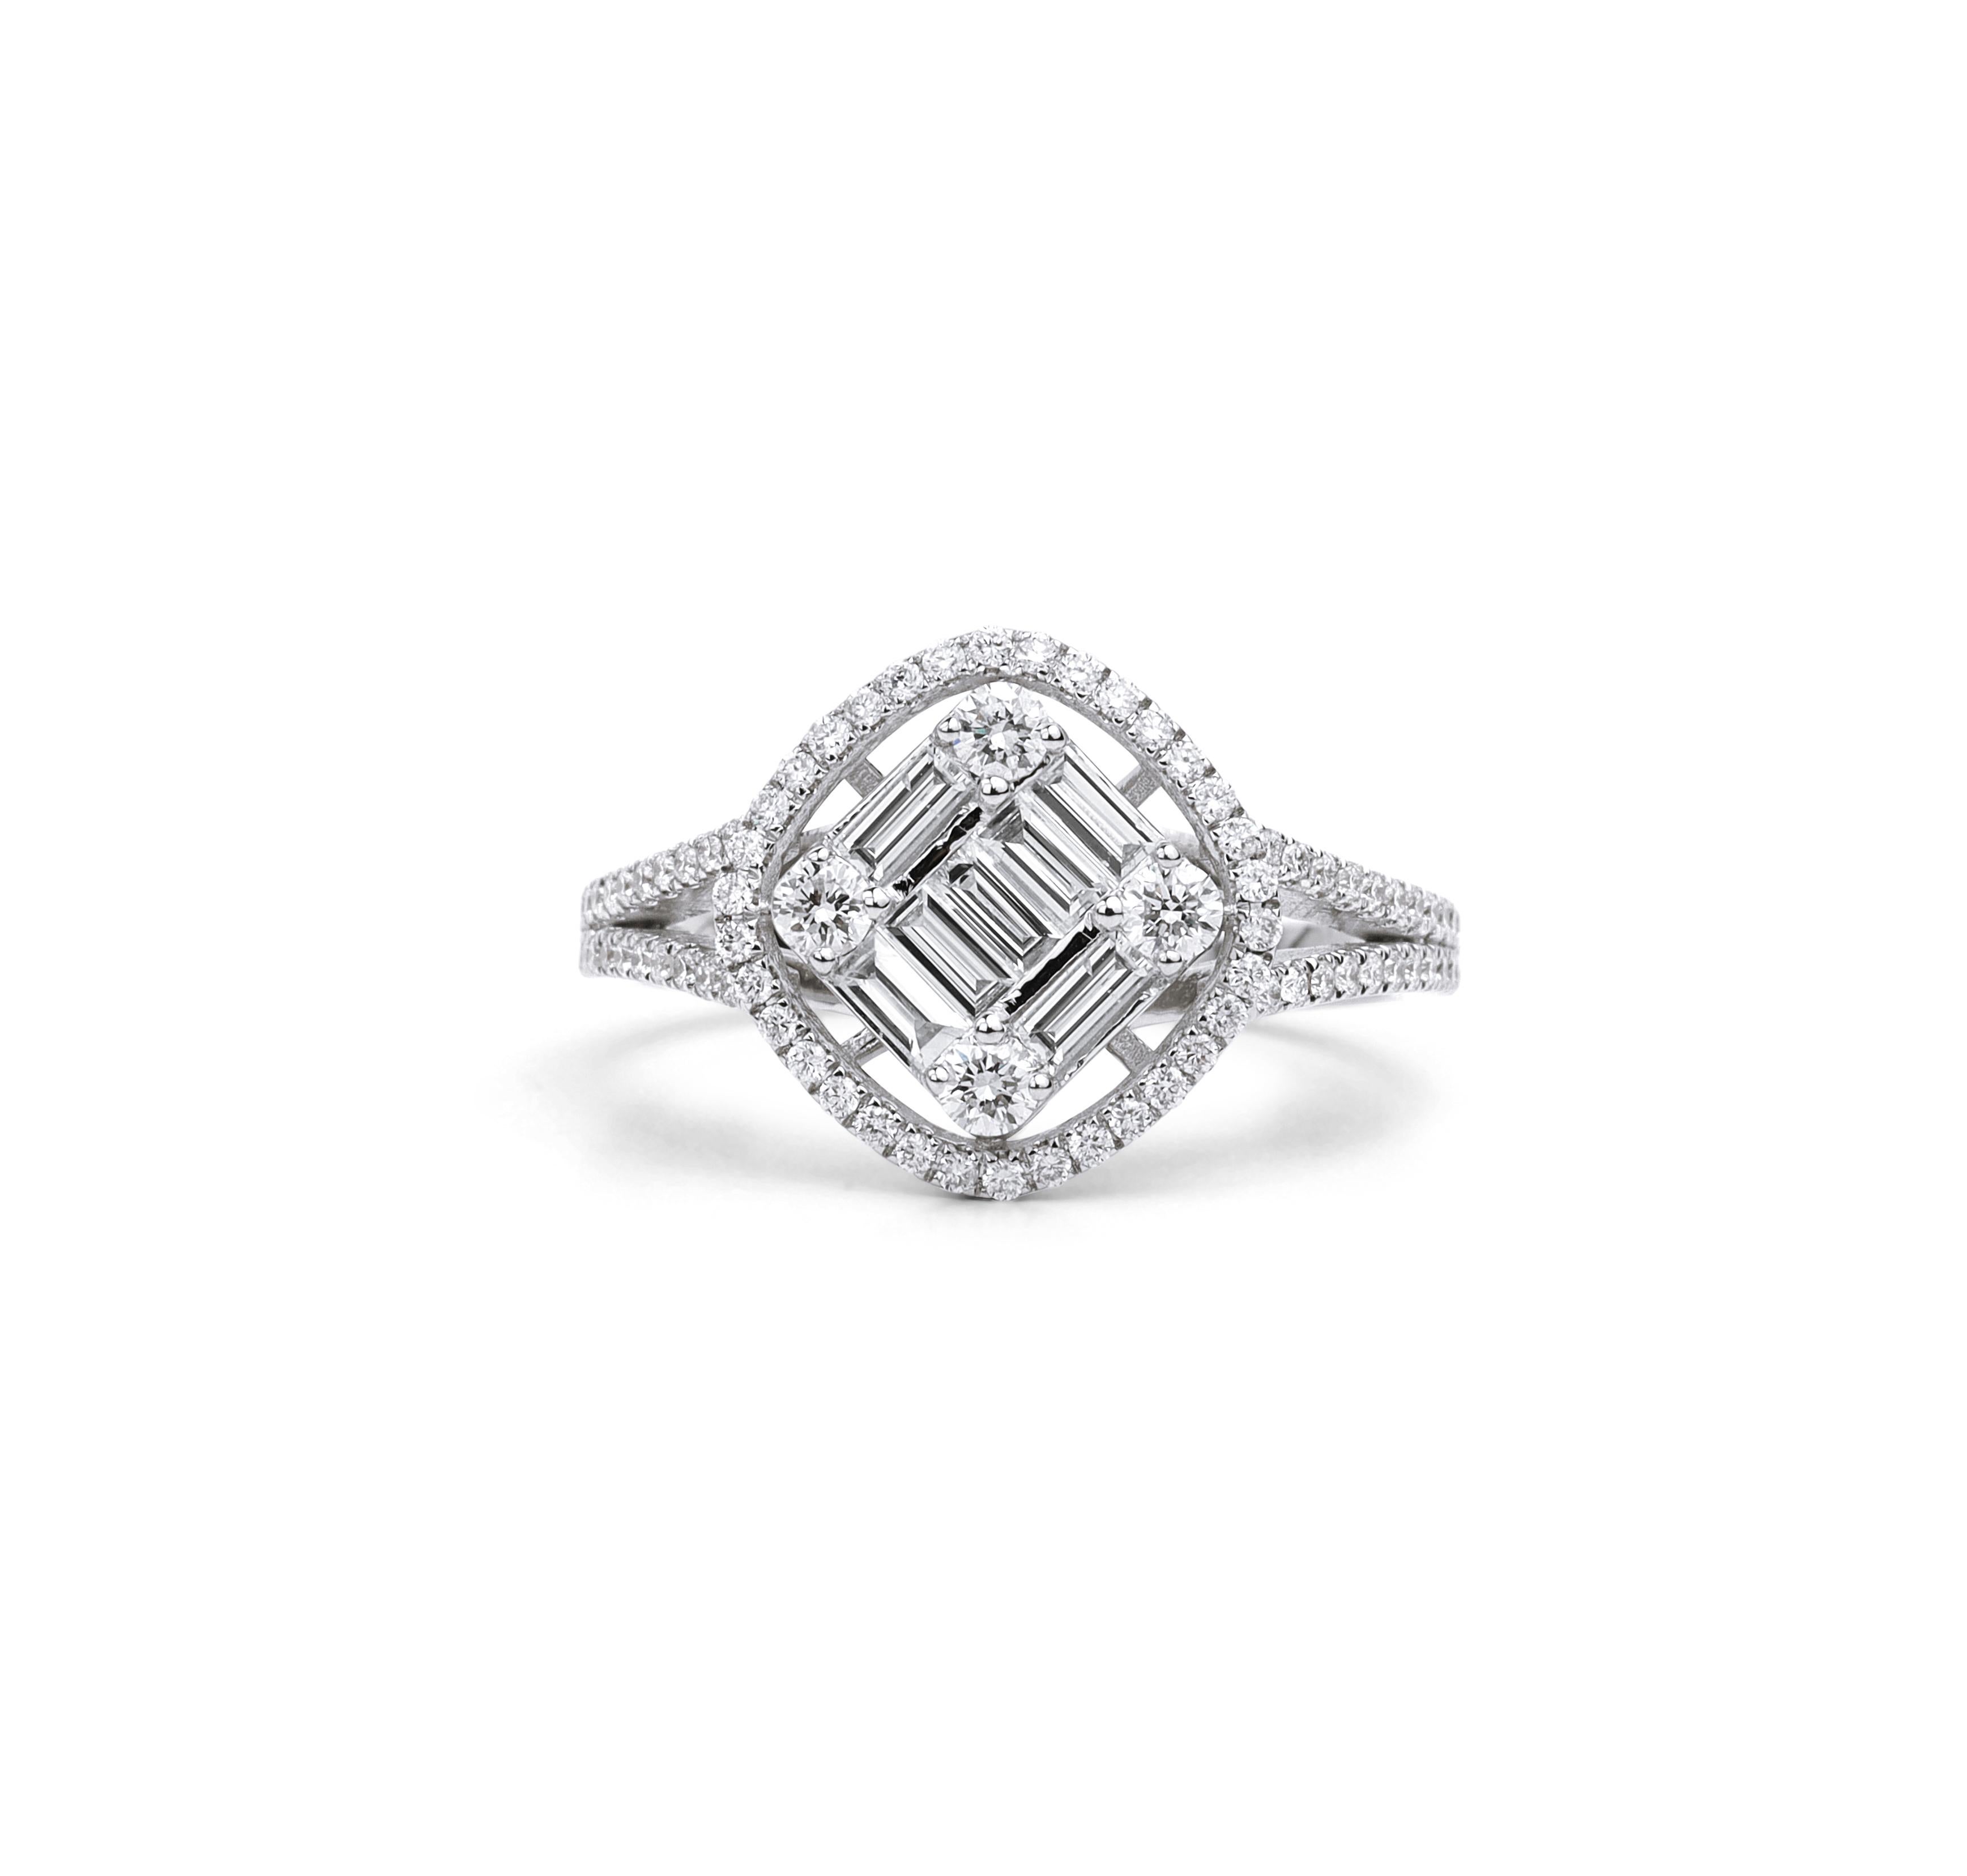 Art Deco Diamond baguette cut ring illusion Setting, 1.1 TCW F G VS Diamond Ring


Available in 18k white gold.

Same design can be made also with other custom gemstones per request.

Product details:

- Solid gold (approx. 4.2 grams)

- approx. 1.1